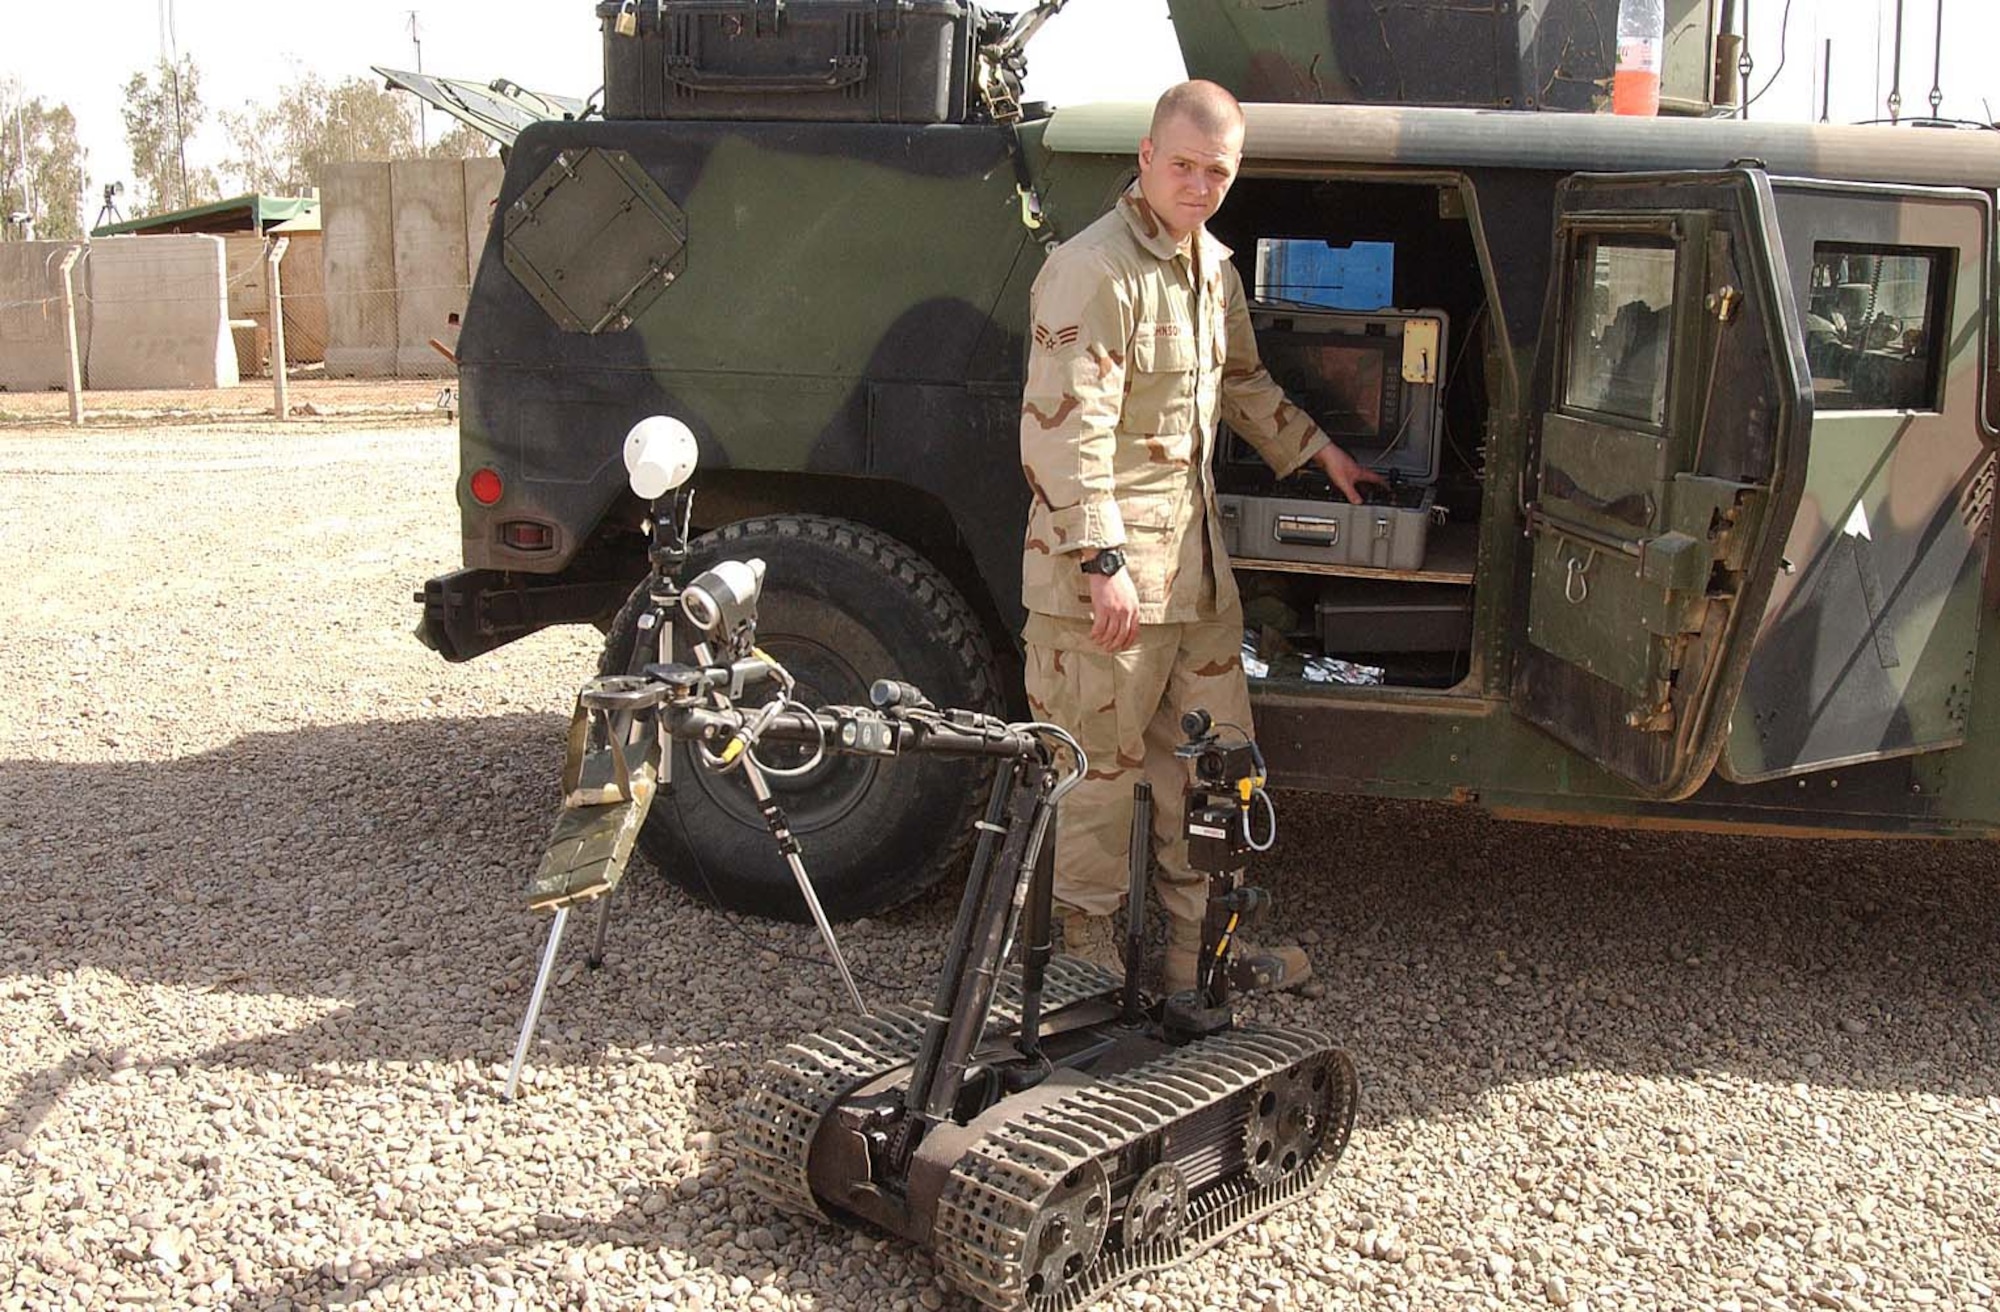 BALAD AIR BASE, Iraq -- Senior Airman Chris Johnson demonstrates how "Angela" works by having the robot hold C4 explosives.  He is a 332nd Expeditionary Civil Engineer Squadron explosive ordnance disposal technician here.  The robots can disassemble improvised explosive devices and perform reconnaissance by searching the area for more hazards.  (U.S. Air Force photo by Senior Airman Colleen Wronek)                   